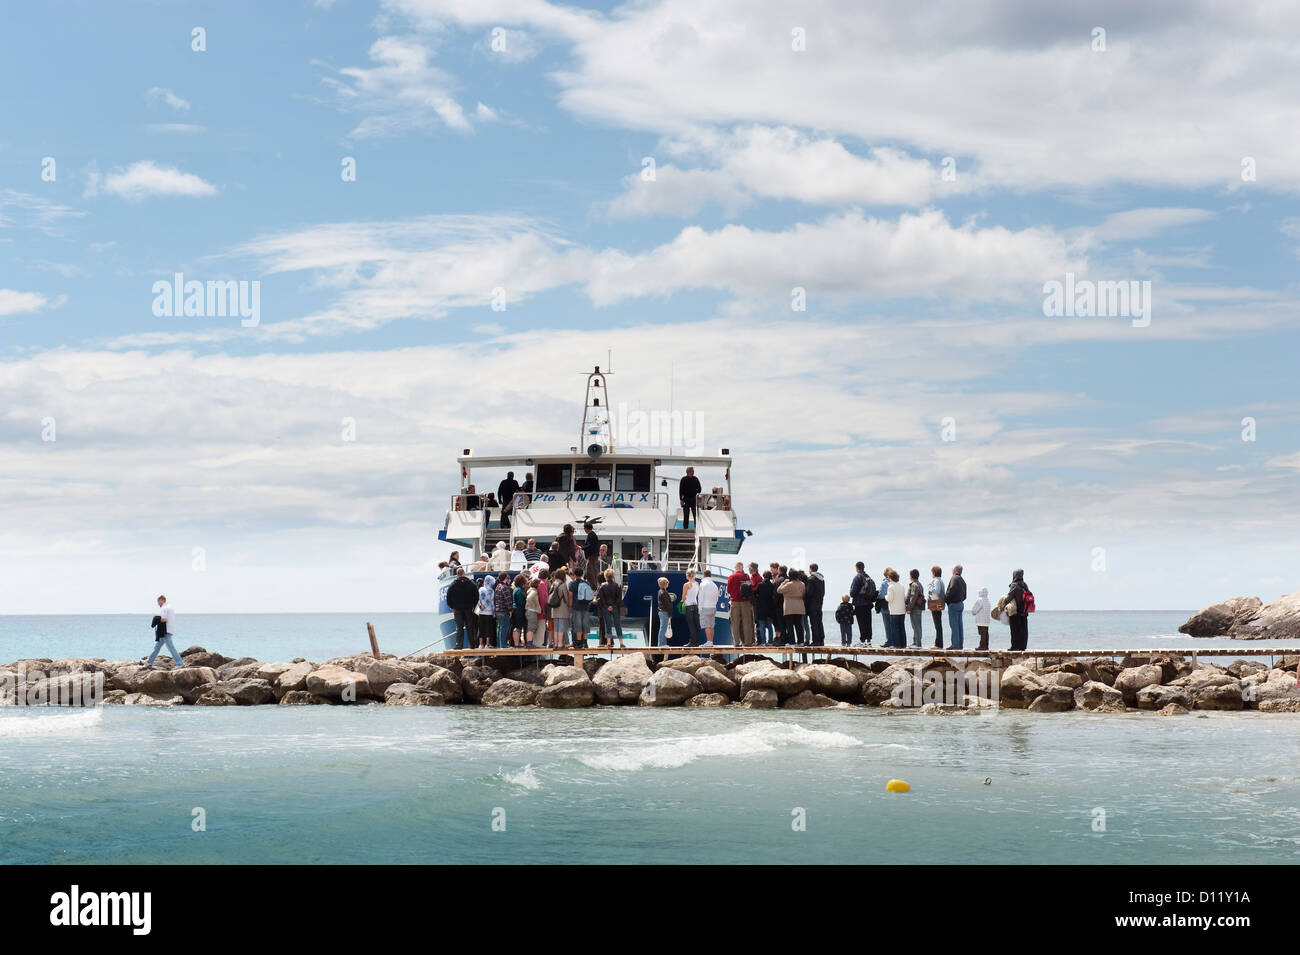 Peguera, Majorca, Spain, tourists waiting at the landing on her boat trip Stock Photo